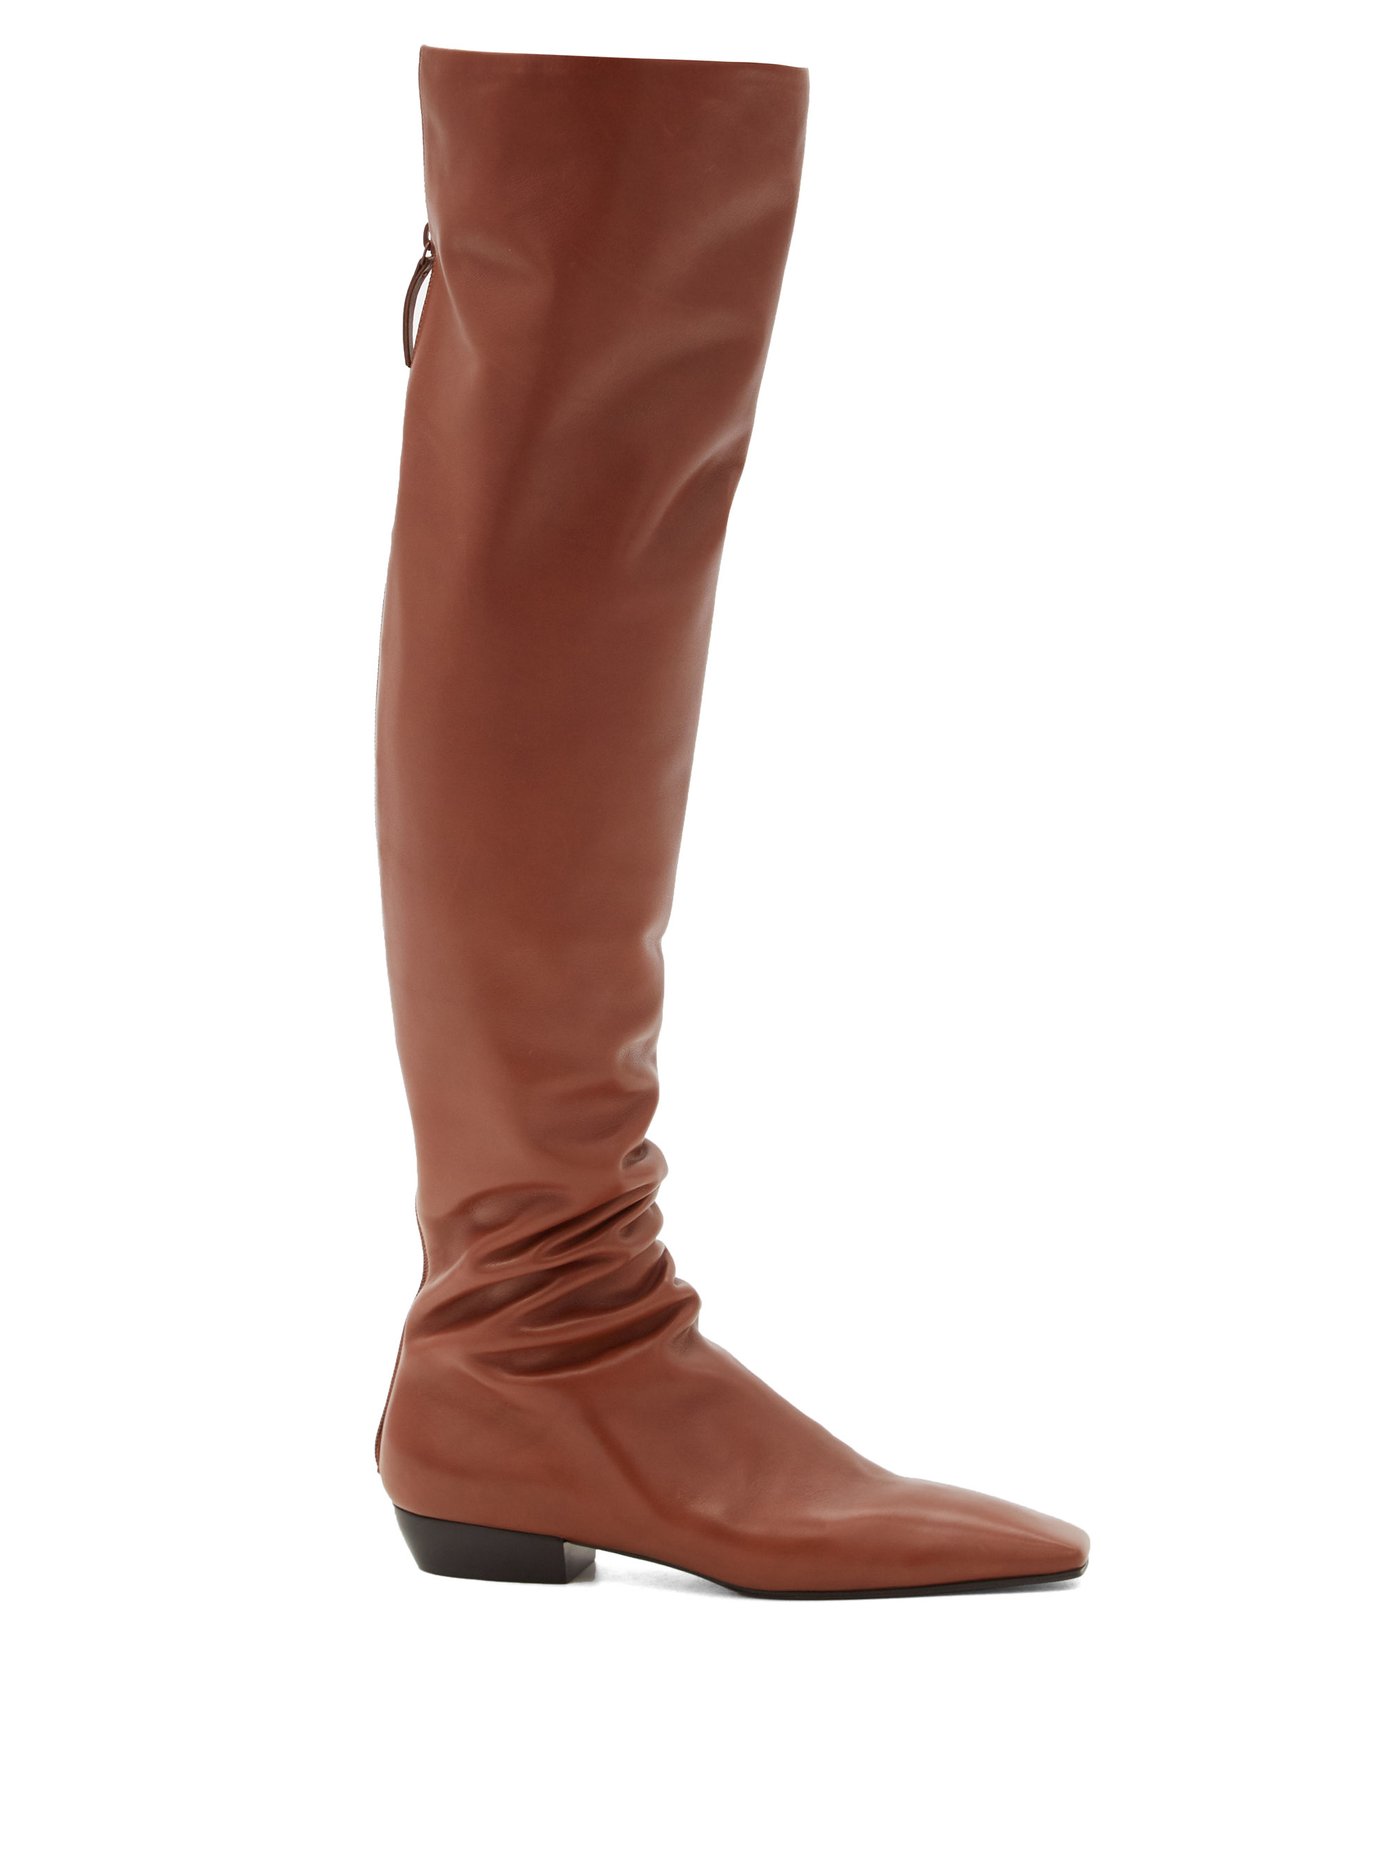 over the knee leather boots uk